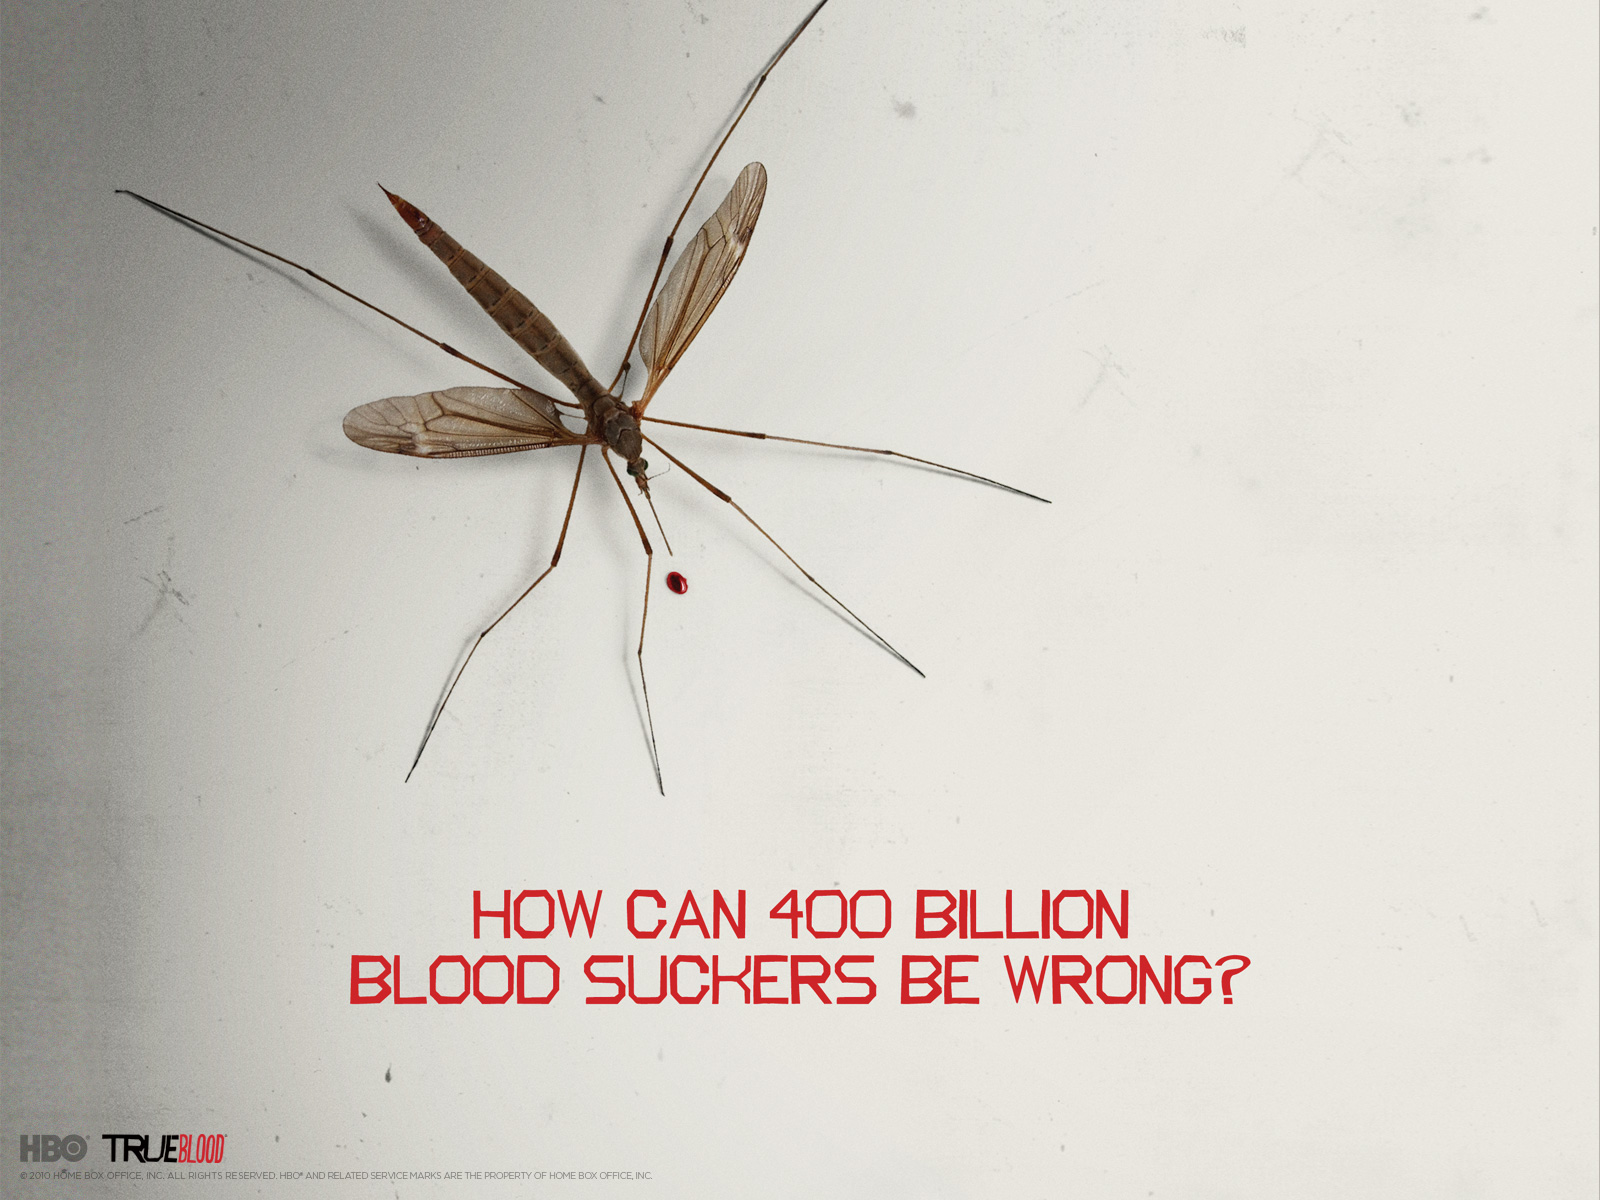 Download High quality mosquito True Blood wallpaper / 1600x1200